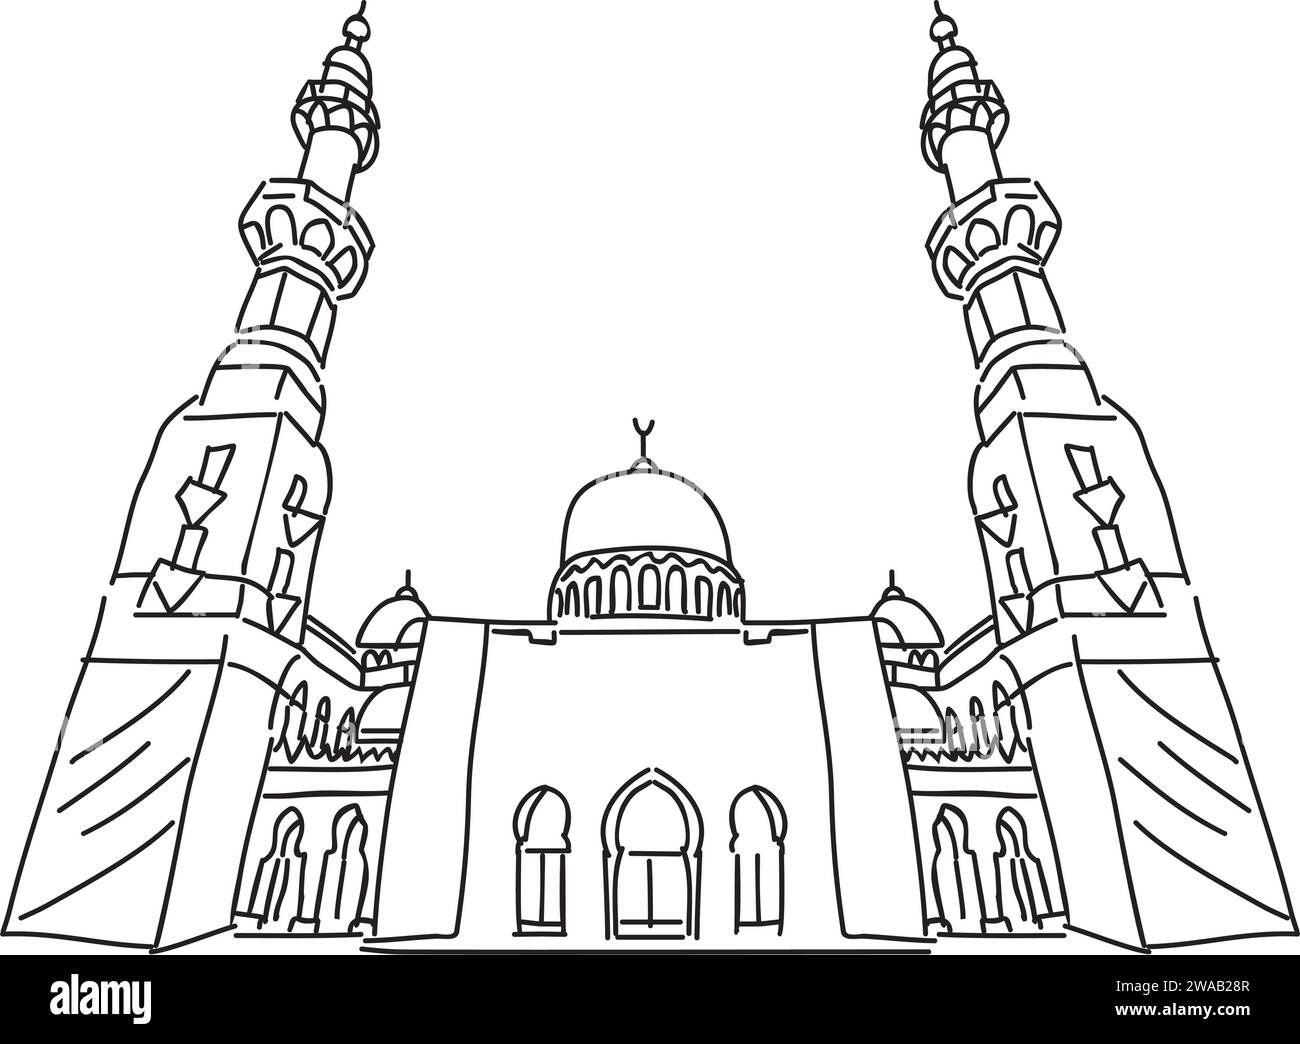 mosque sketch, Black stroke of mosque with twin minarets and dome in the center, vector line art illustration Stock Vector